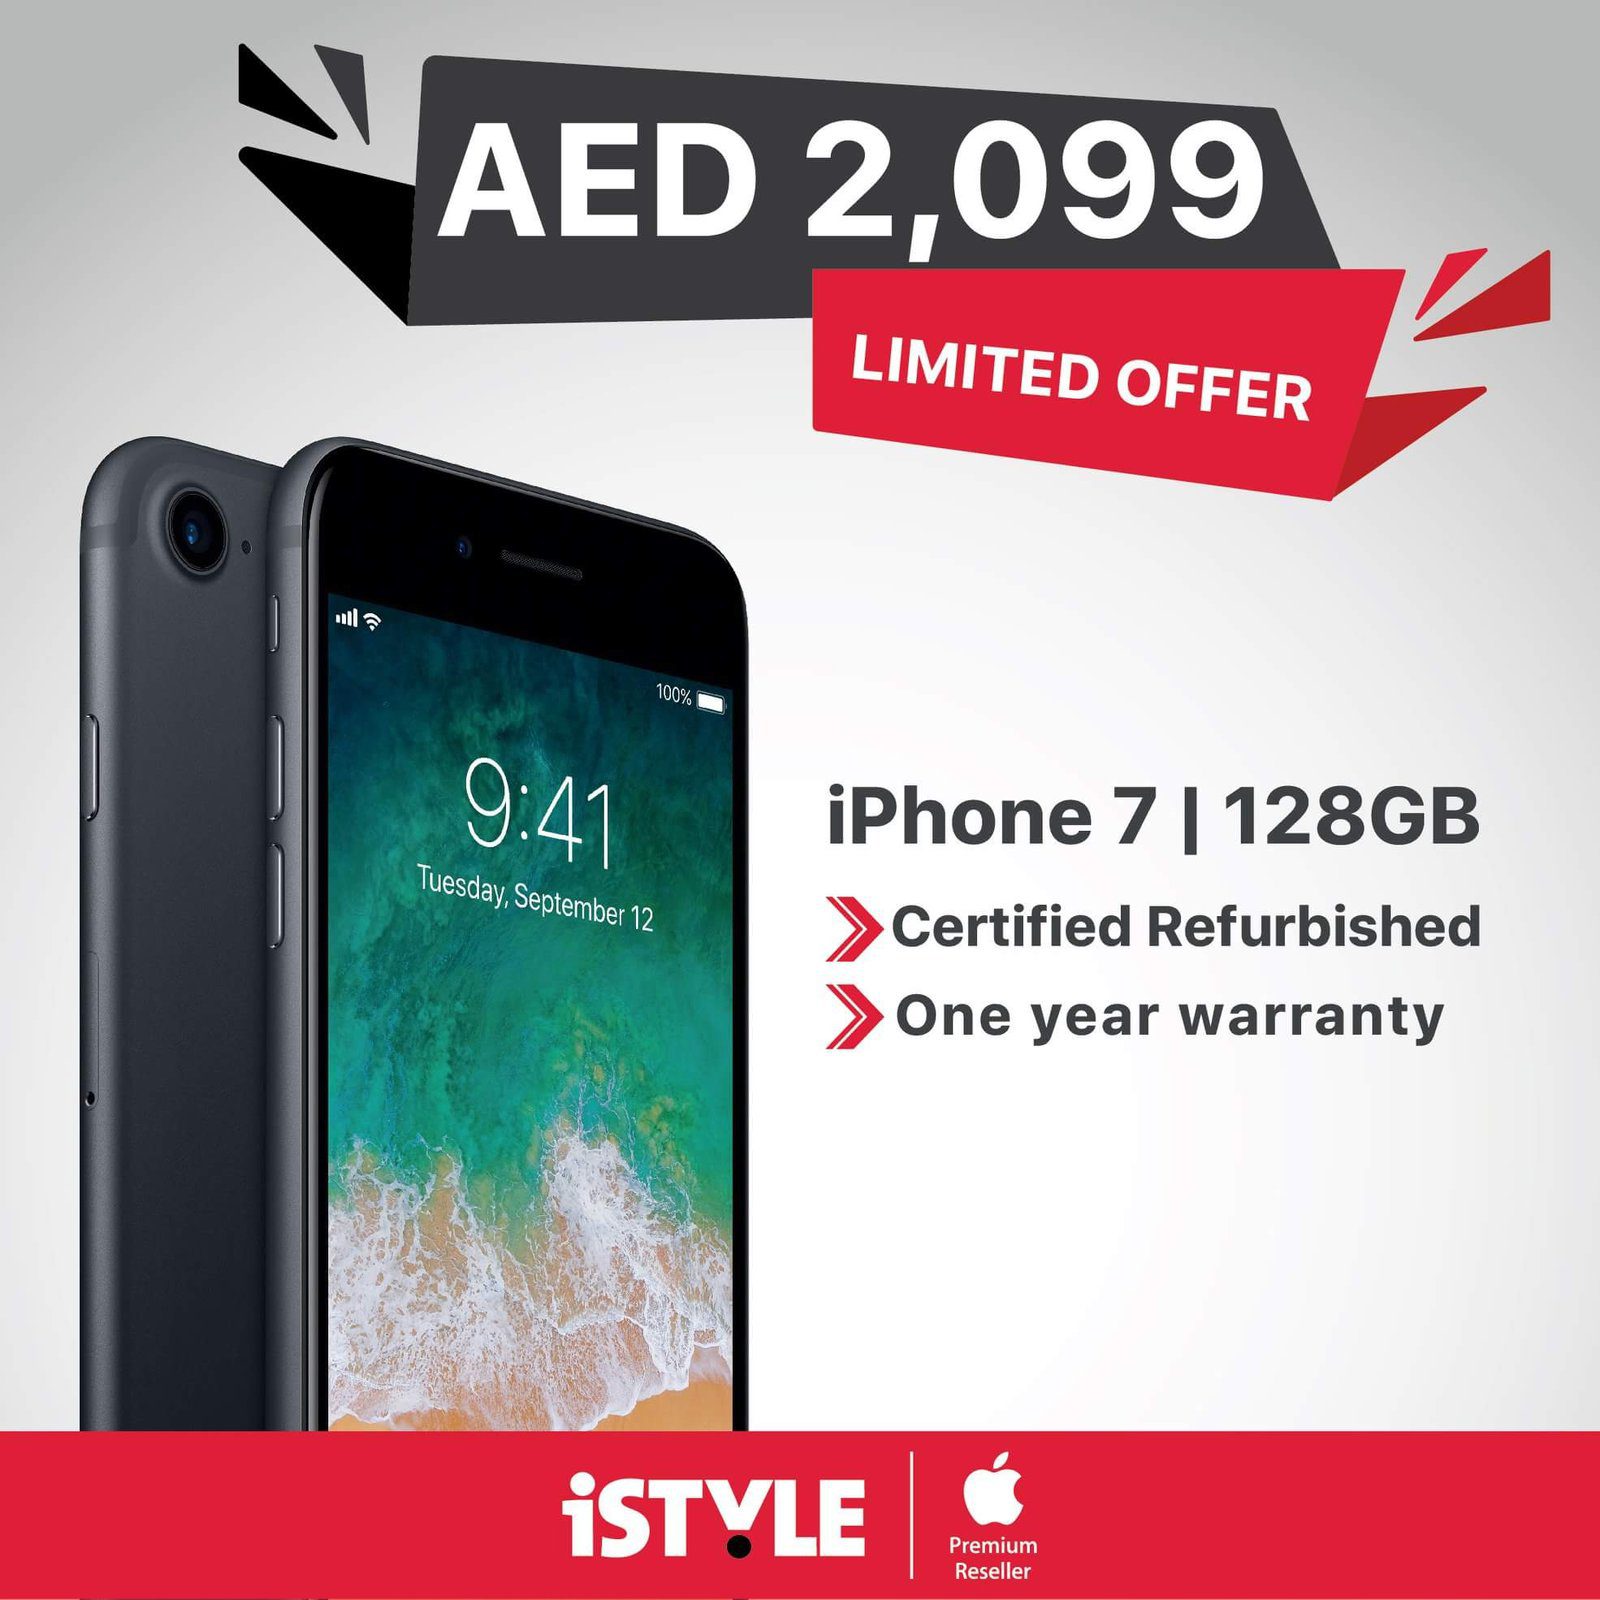 iPhone 7 128GB now AED 2,099 incl. VAT  #istyle